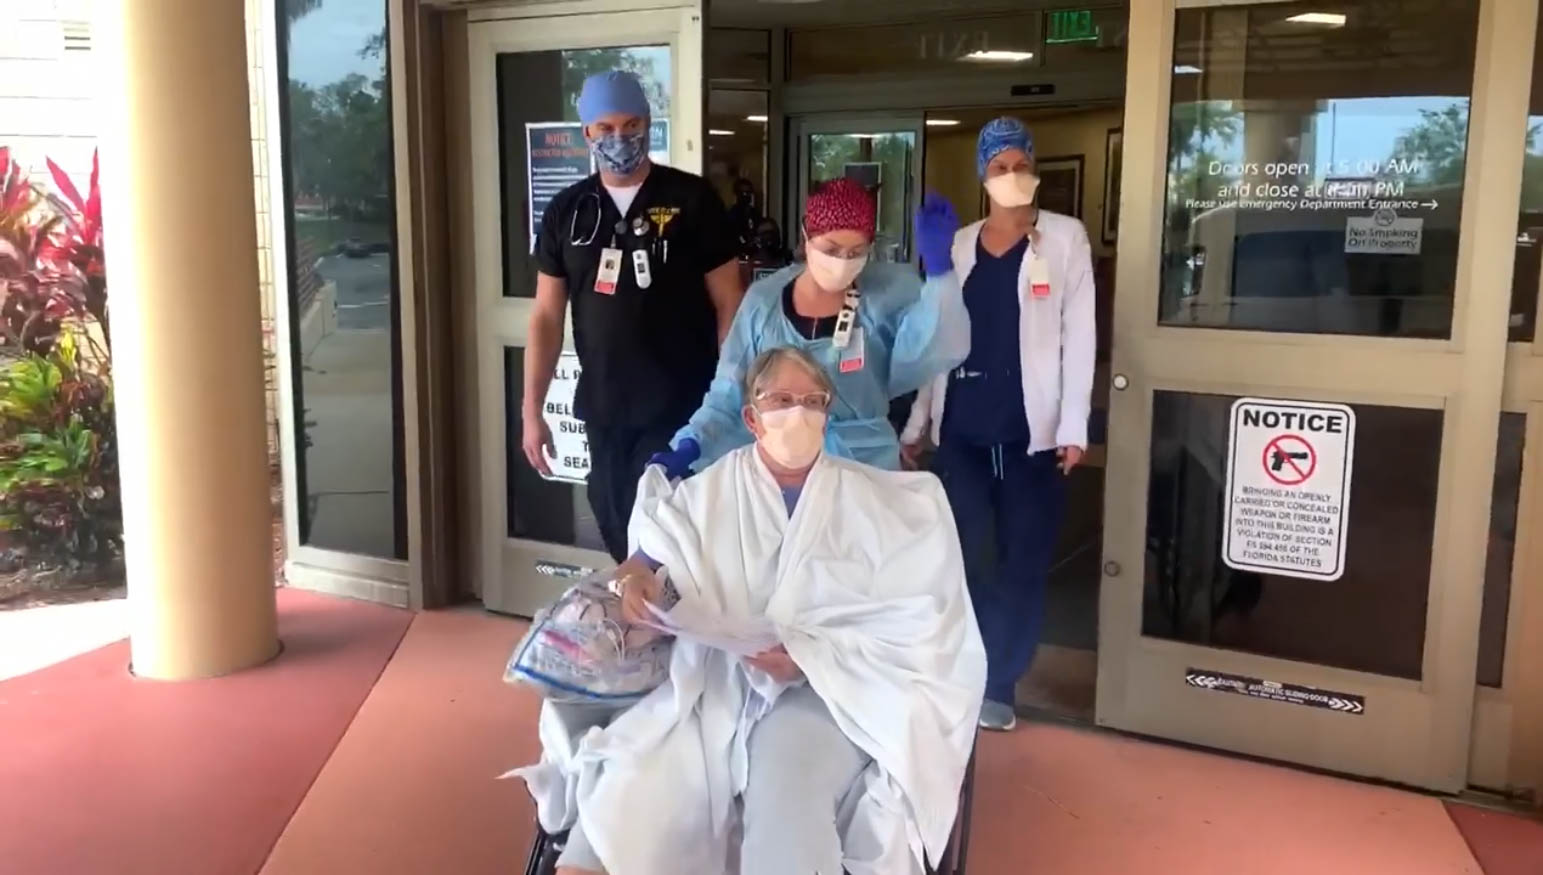 Video Thumbnail: Mary Frietag, of Leesburg, is discharged in stable condition after ‘graduating’ from weeklong COVID-19 treatment at UF Health Leesburg Hospital. Her care team sends her off with cheers and applause.